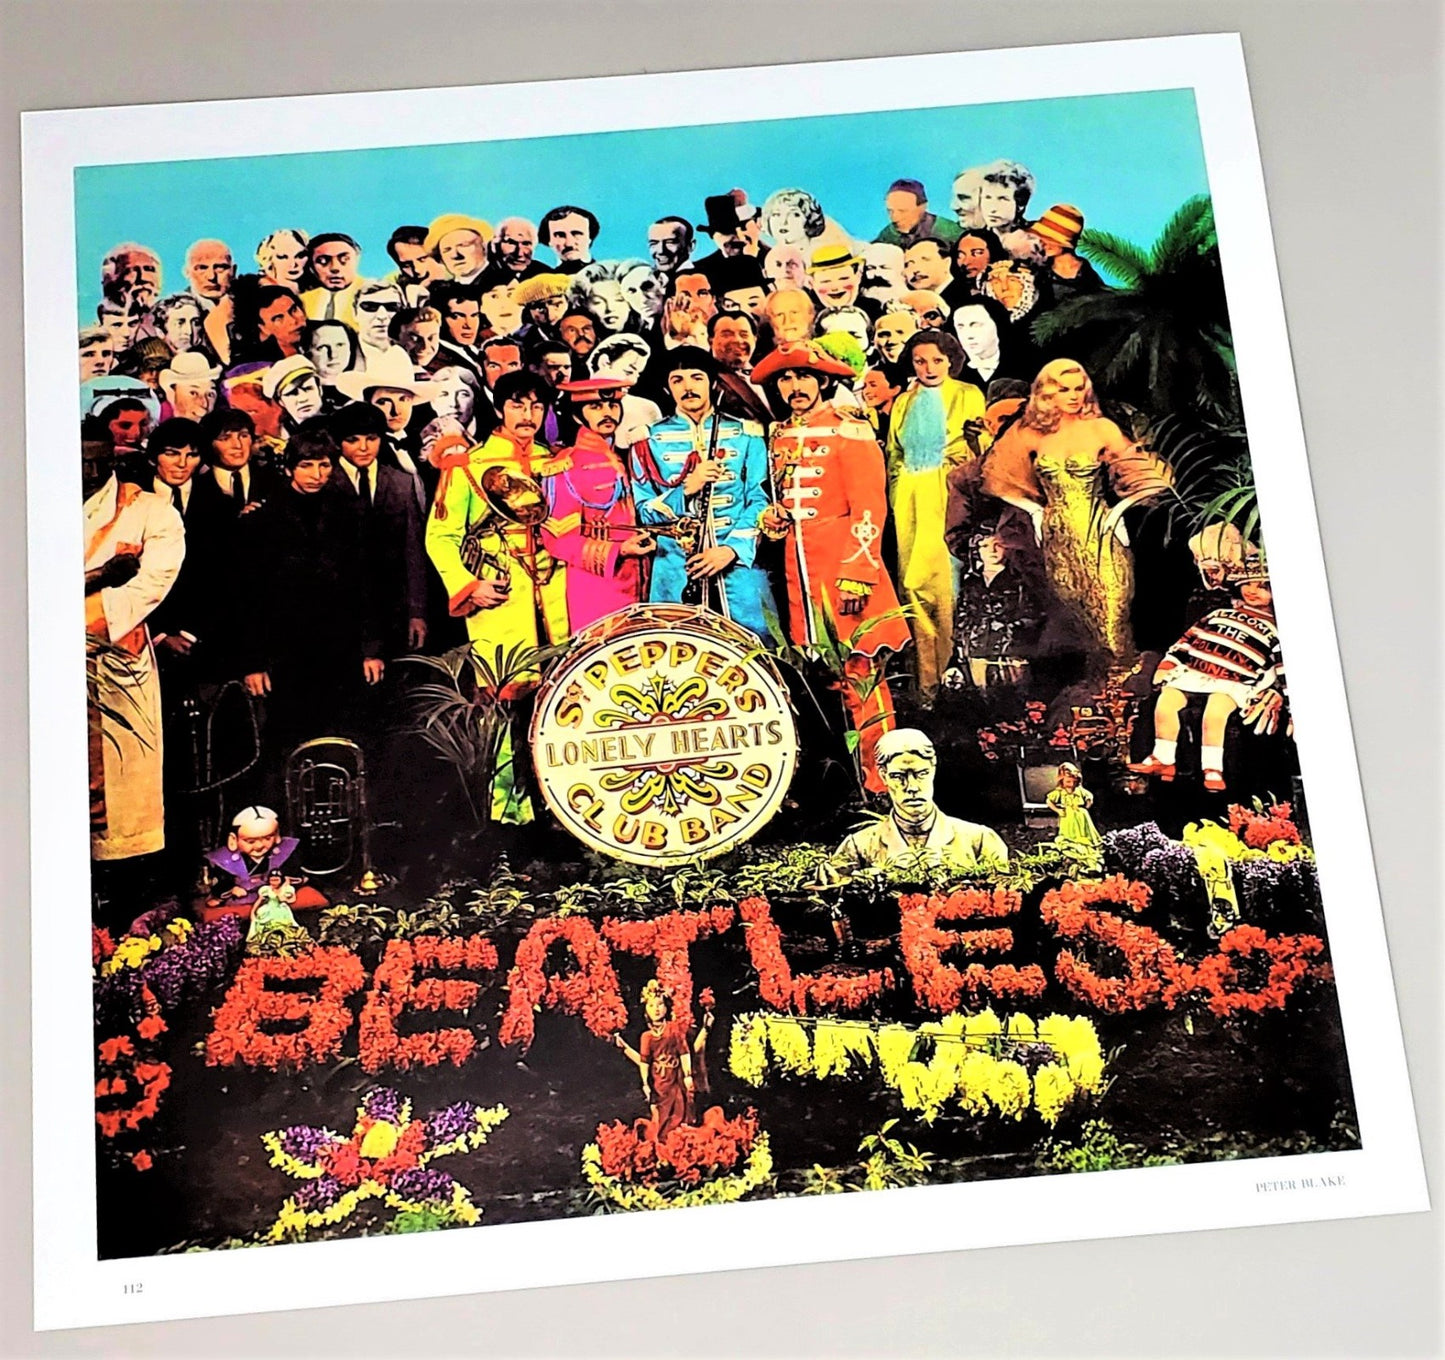 The Beatles 1987 Sgt. Peppers Lonely Hearts Club Band cover art page featured in 2017 Art Record Covers